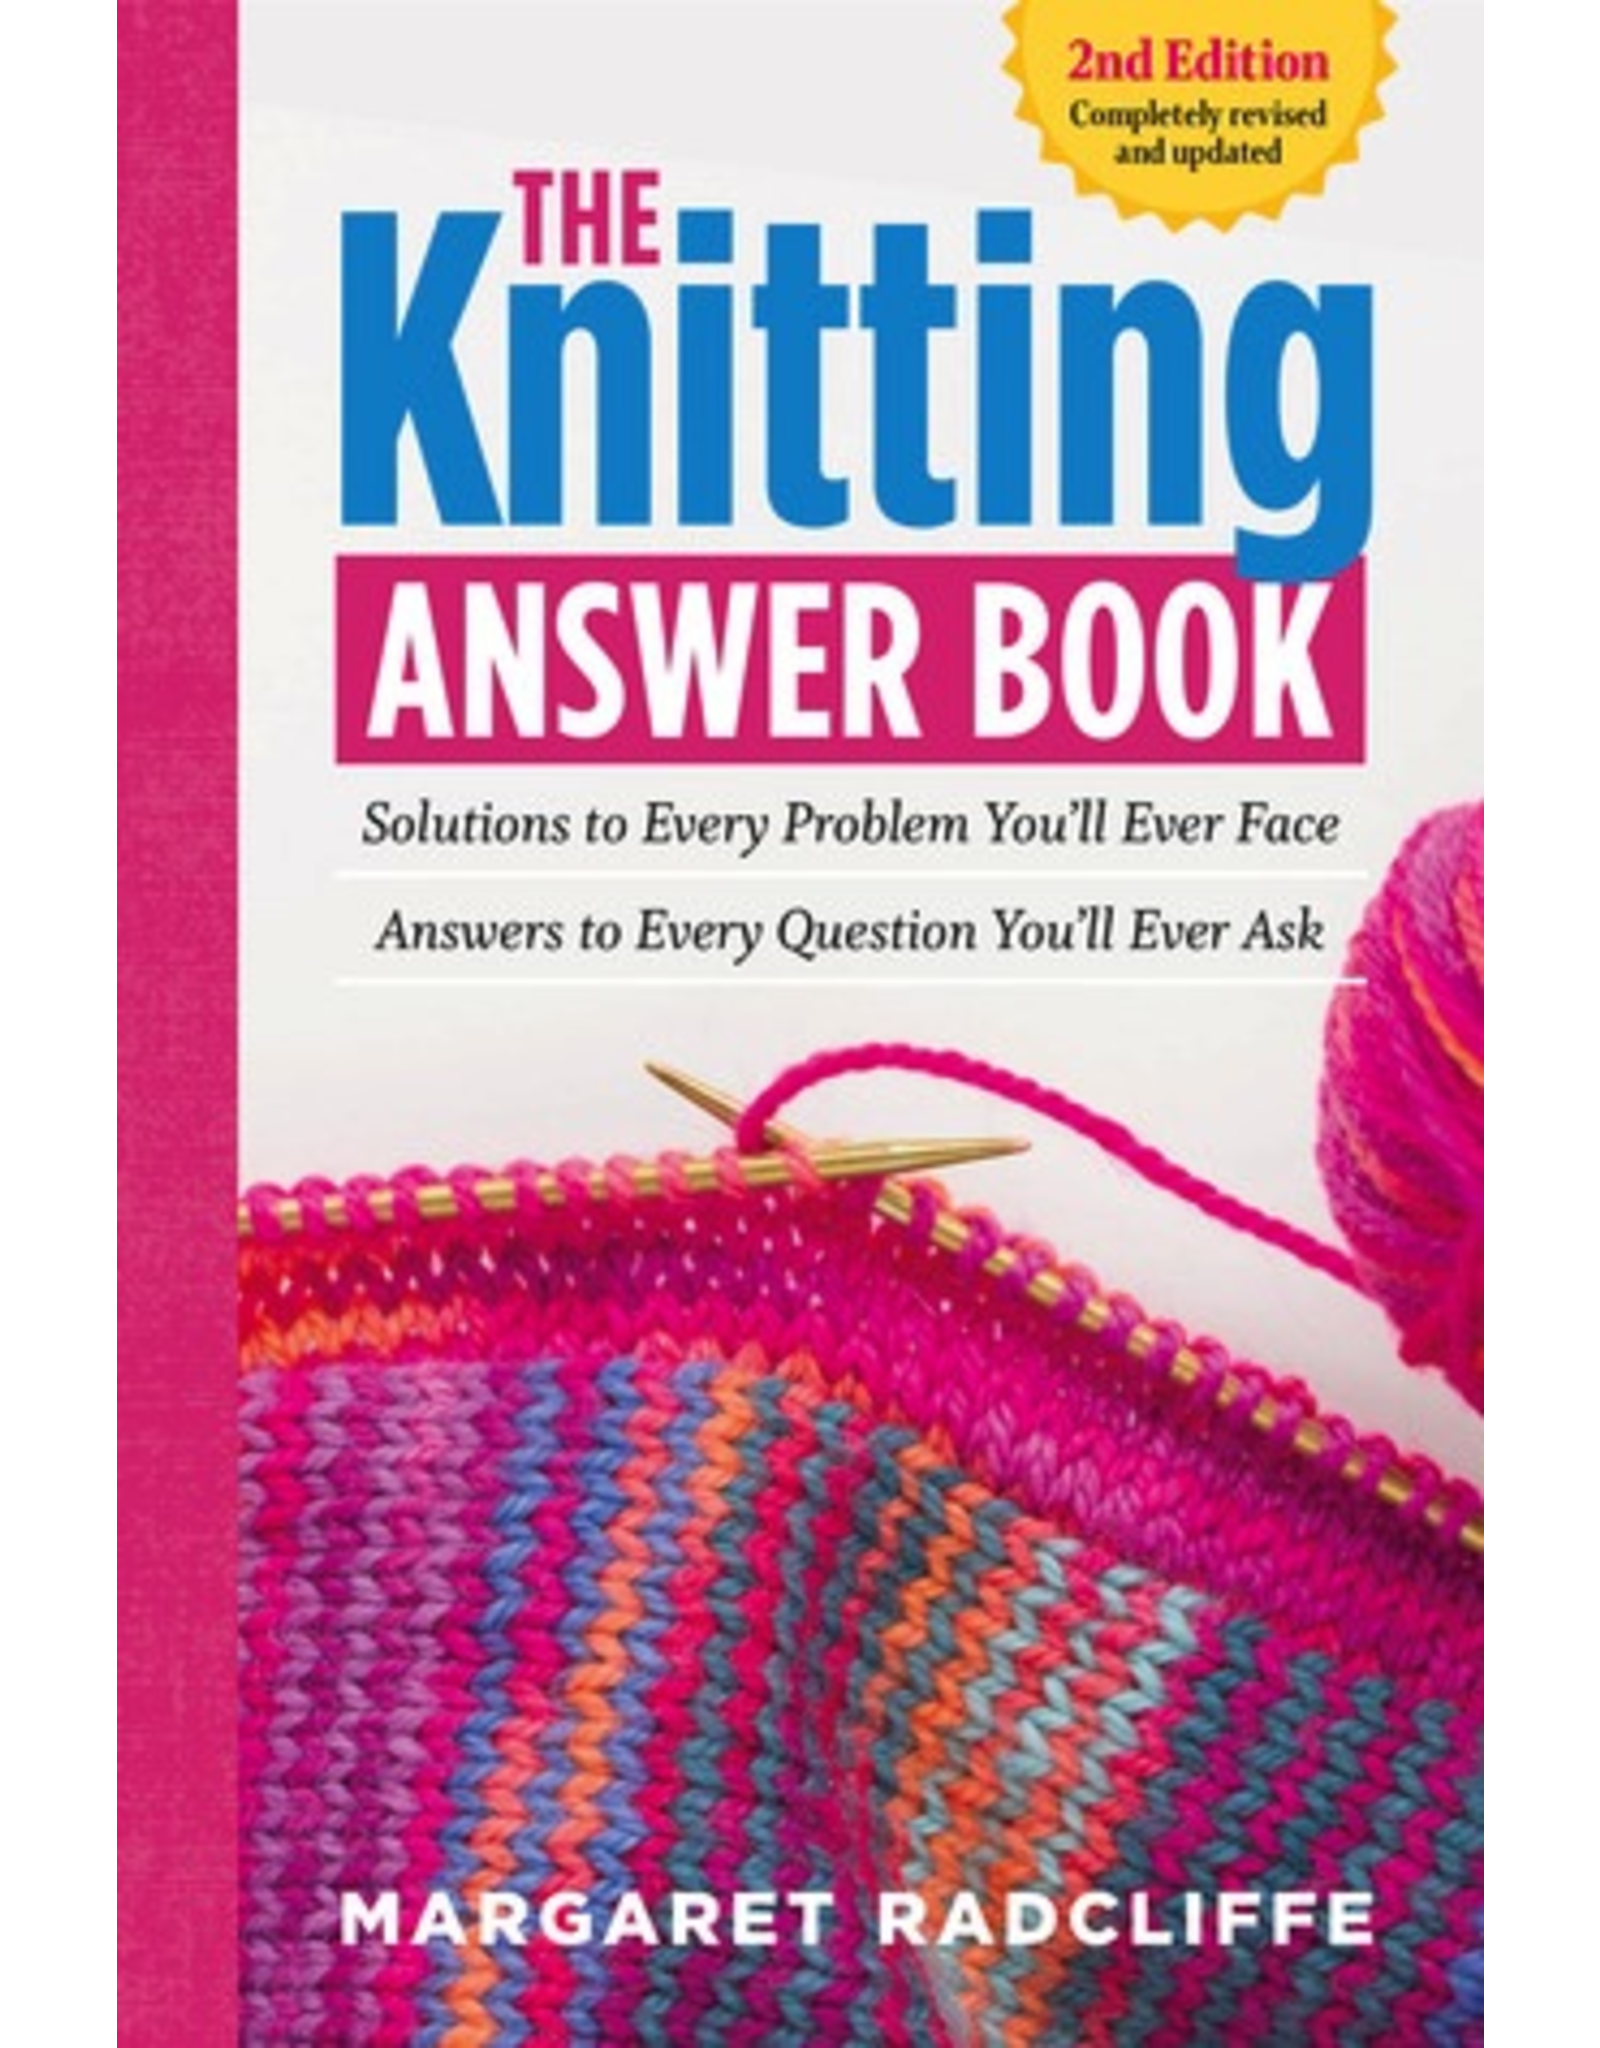 The Knitting Answer Book: 2nd Edition